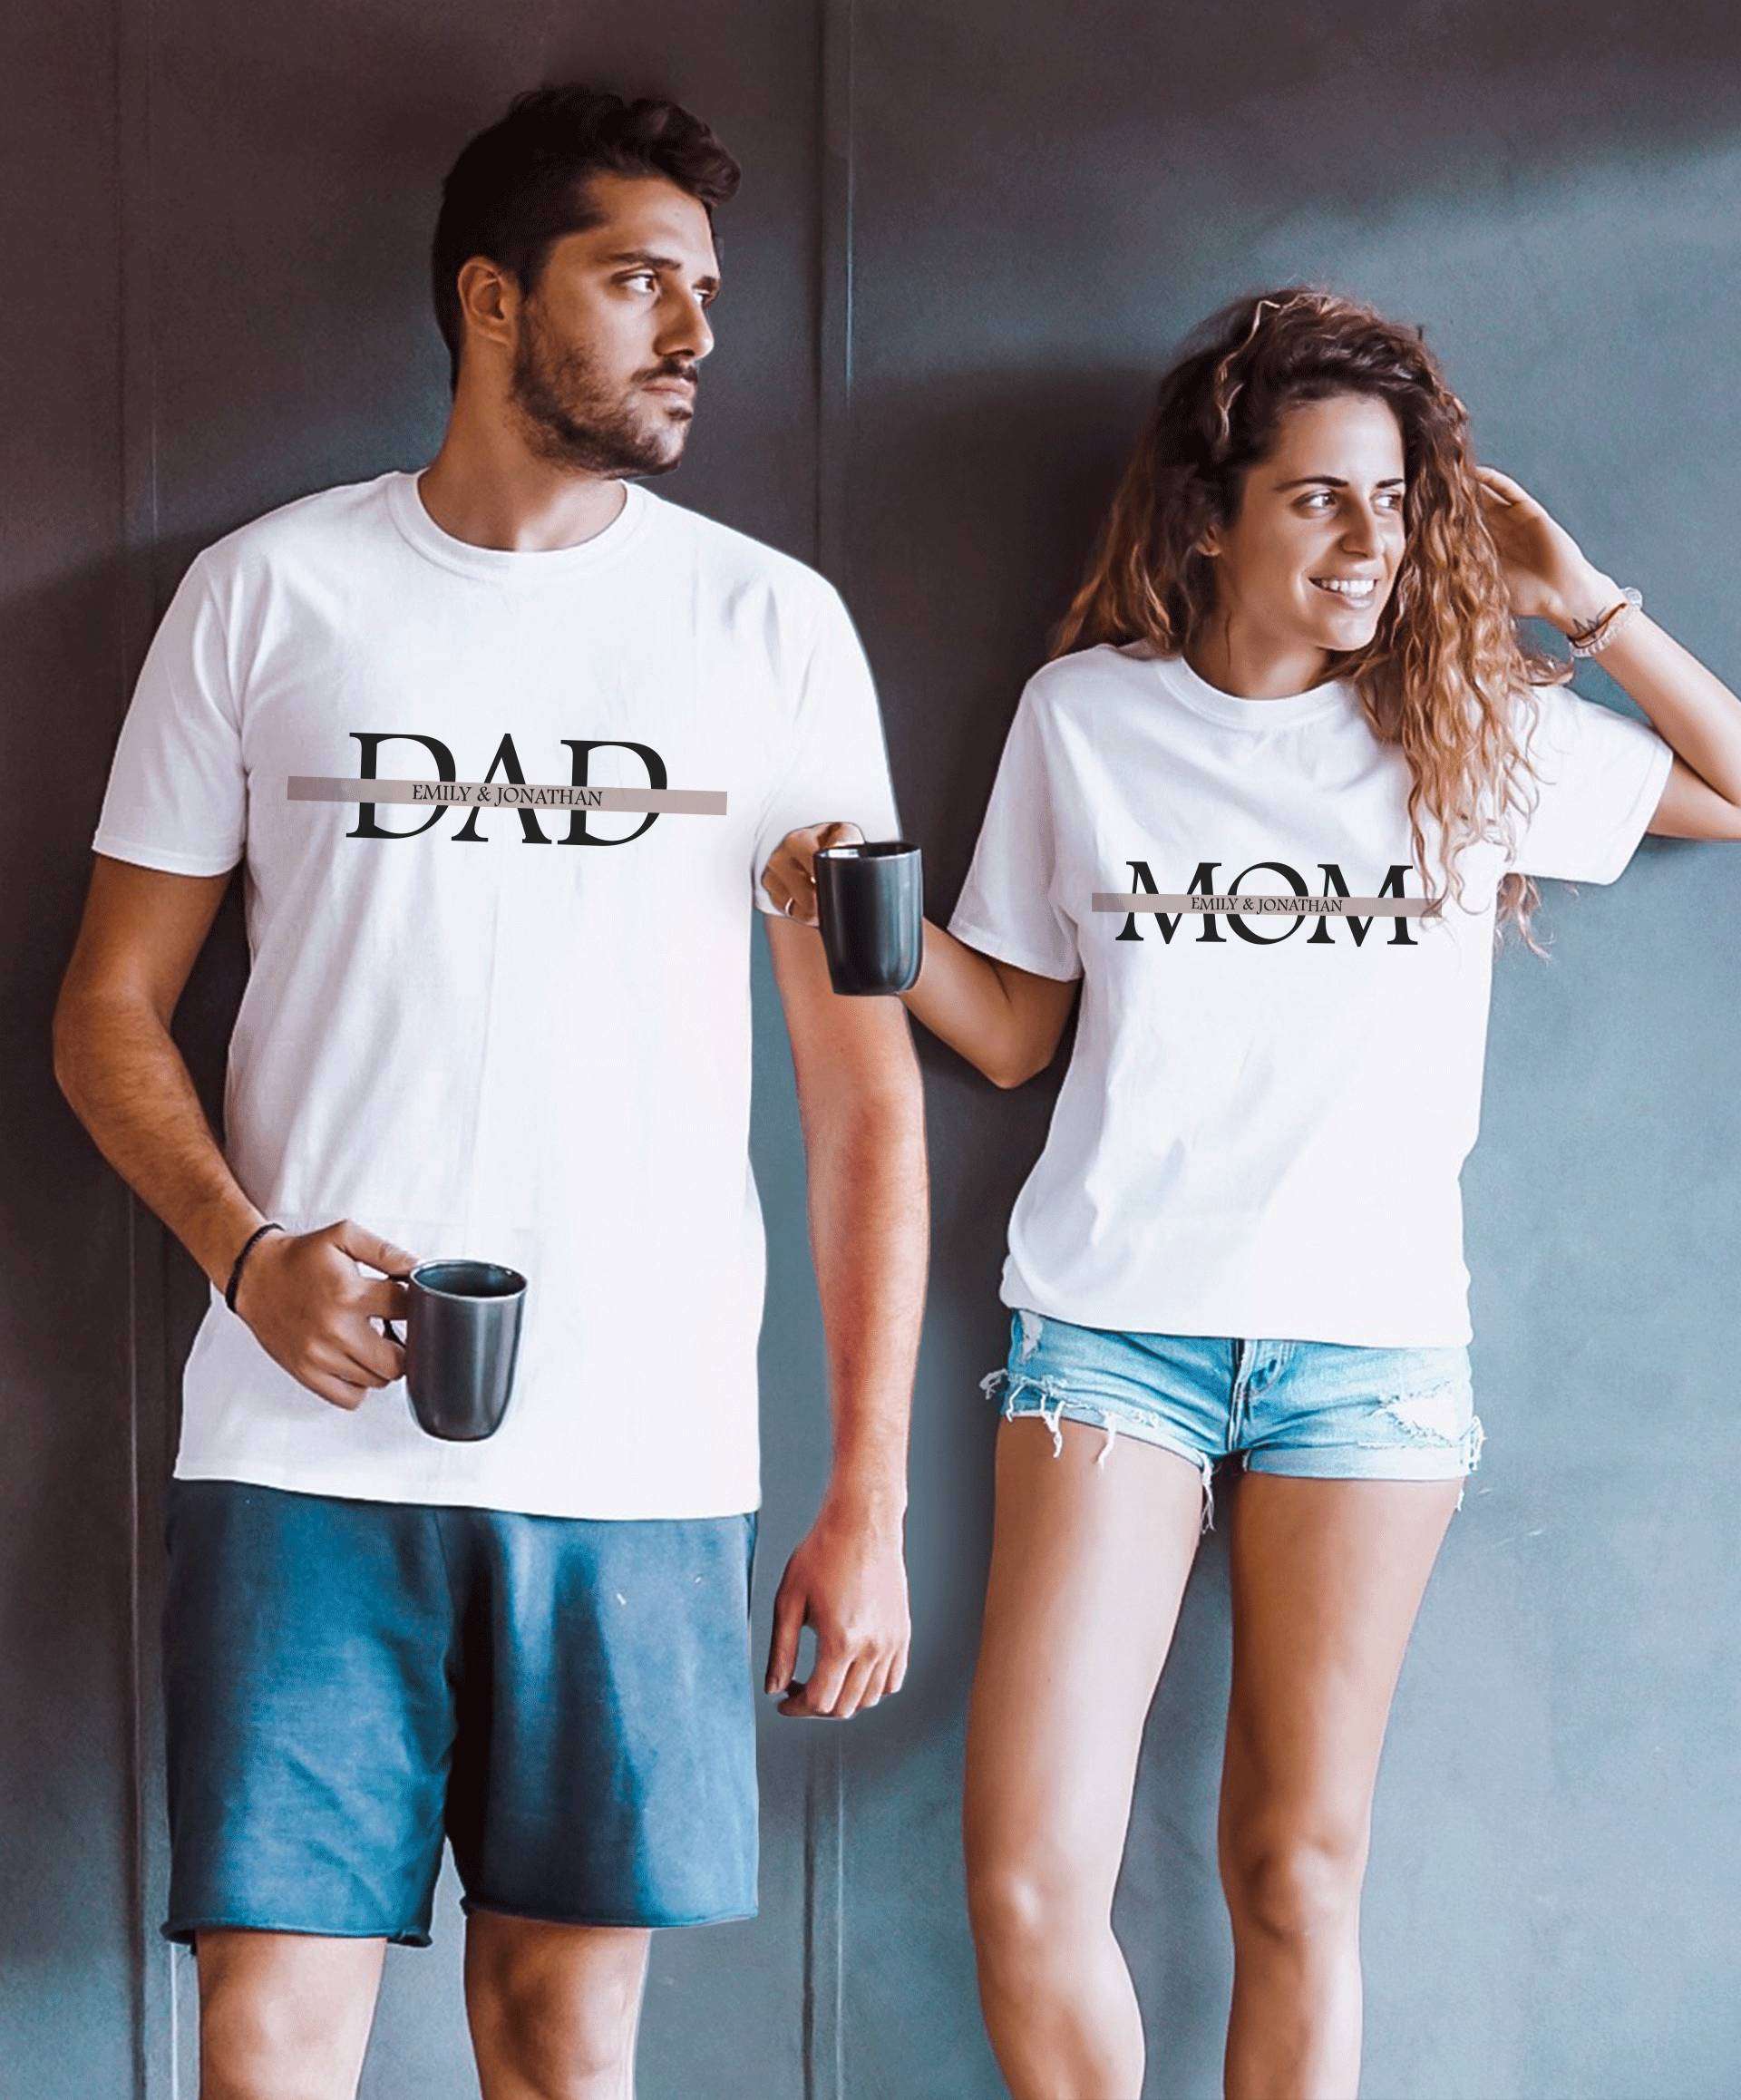 matching shirts for couples